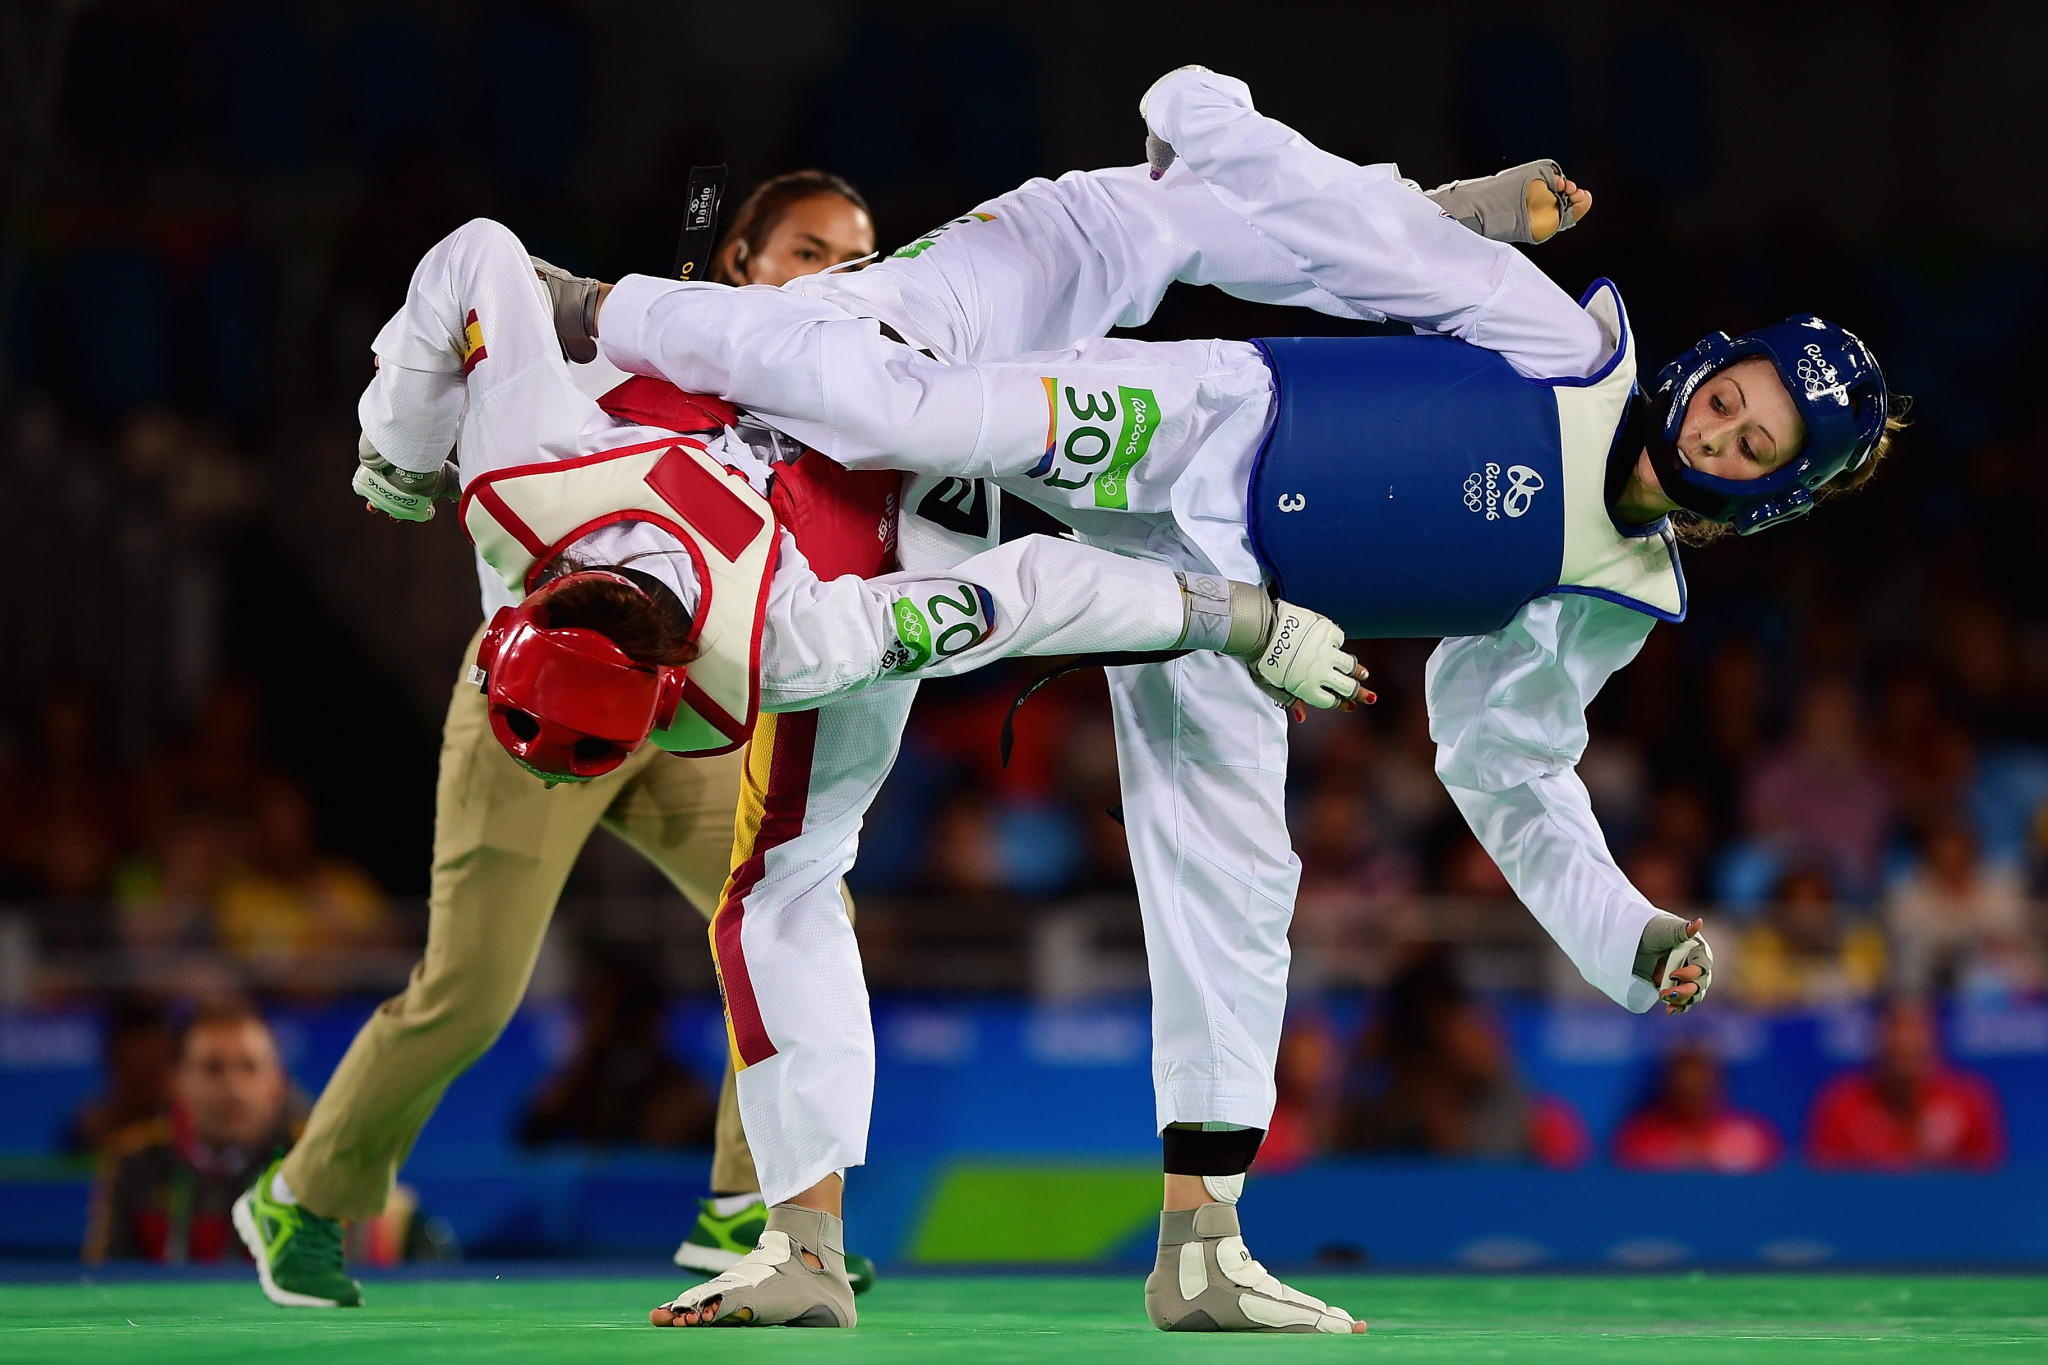 Taekwondo's chances of being included on Birmingham 2022 programme ended day after campaign launched